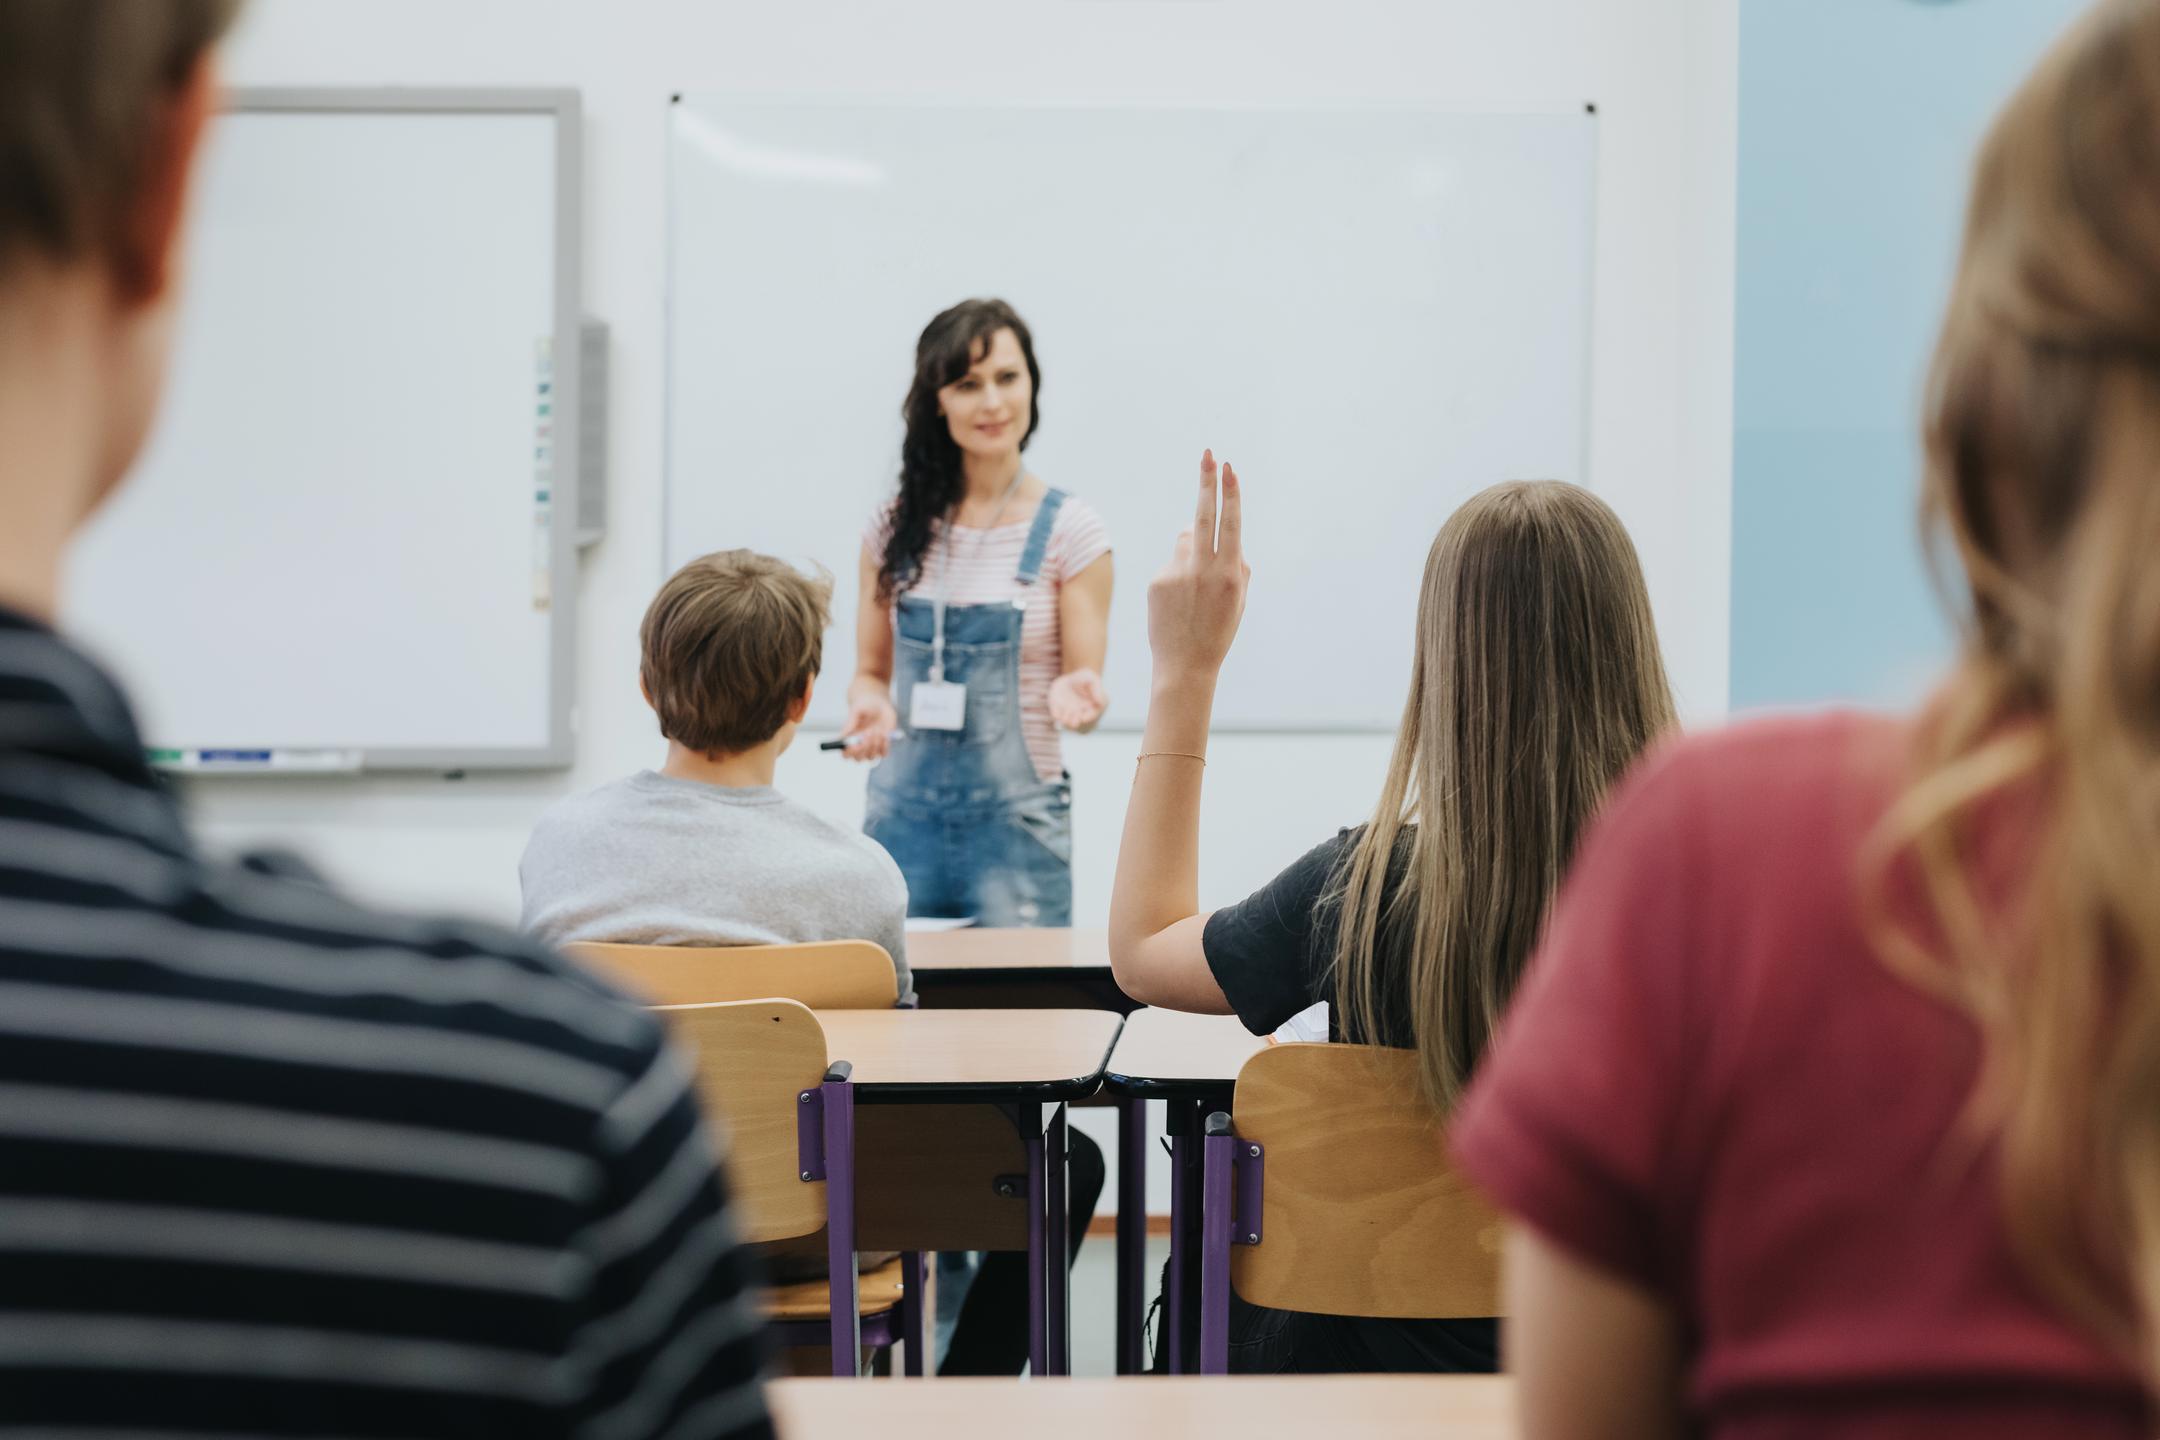 A teacher standing in front of a classroom full of students, ready to lead a lesson.